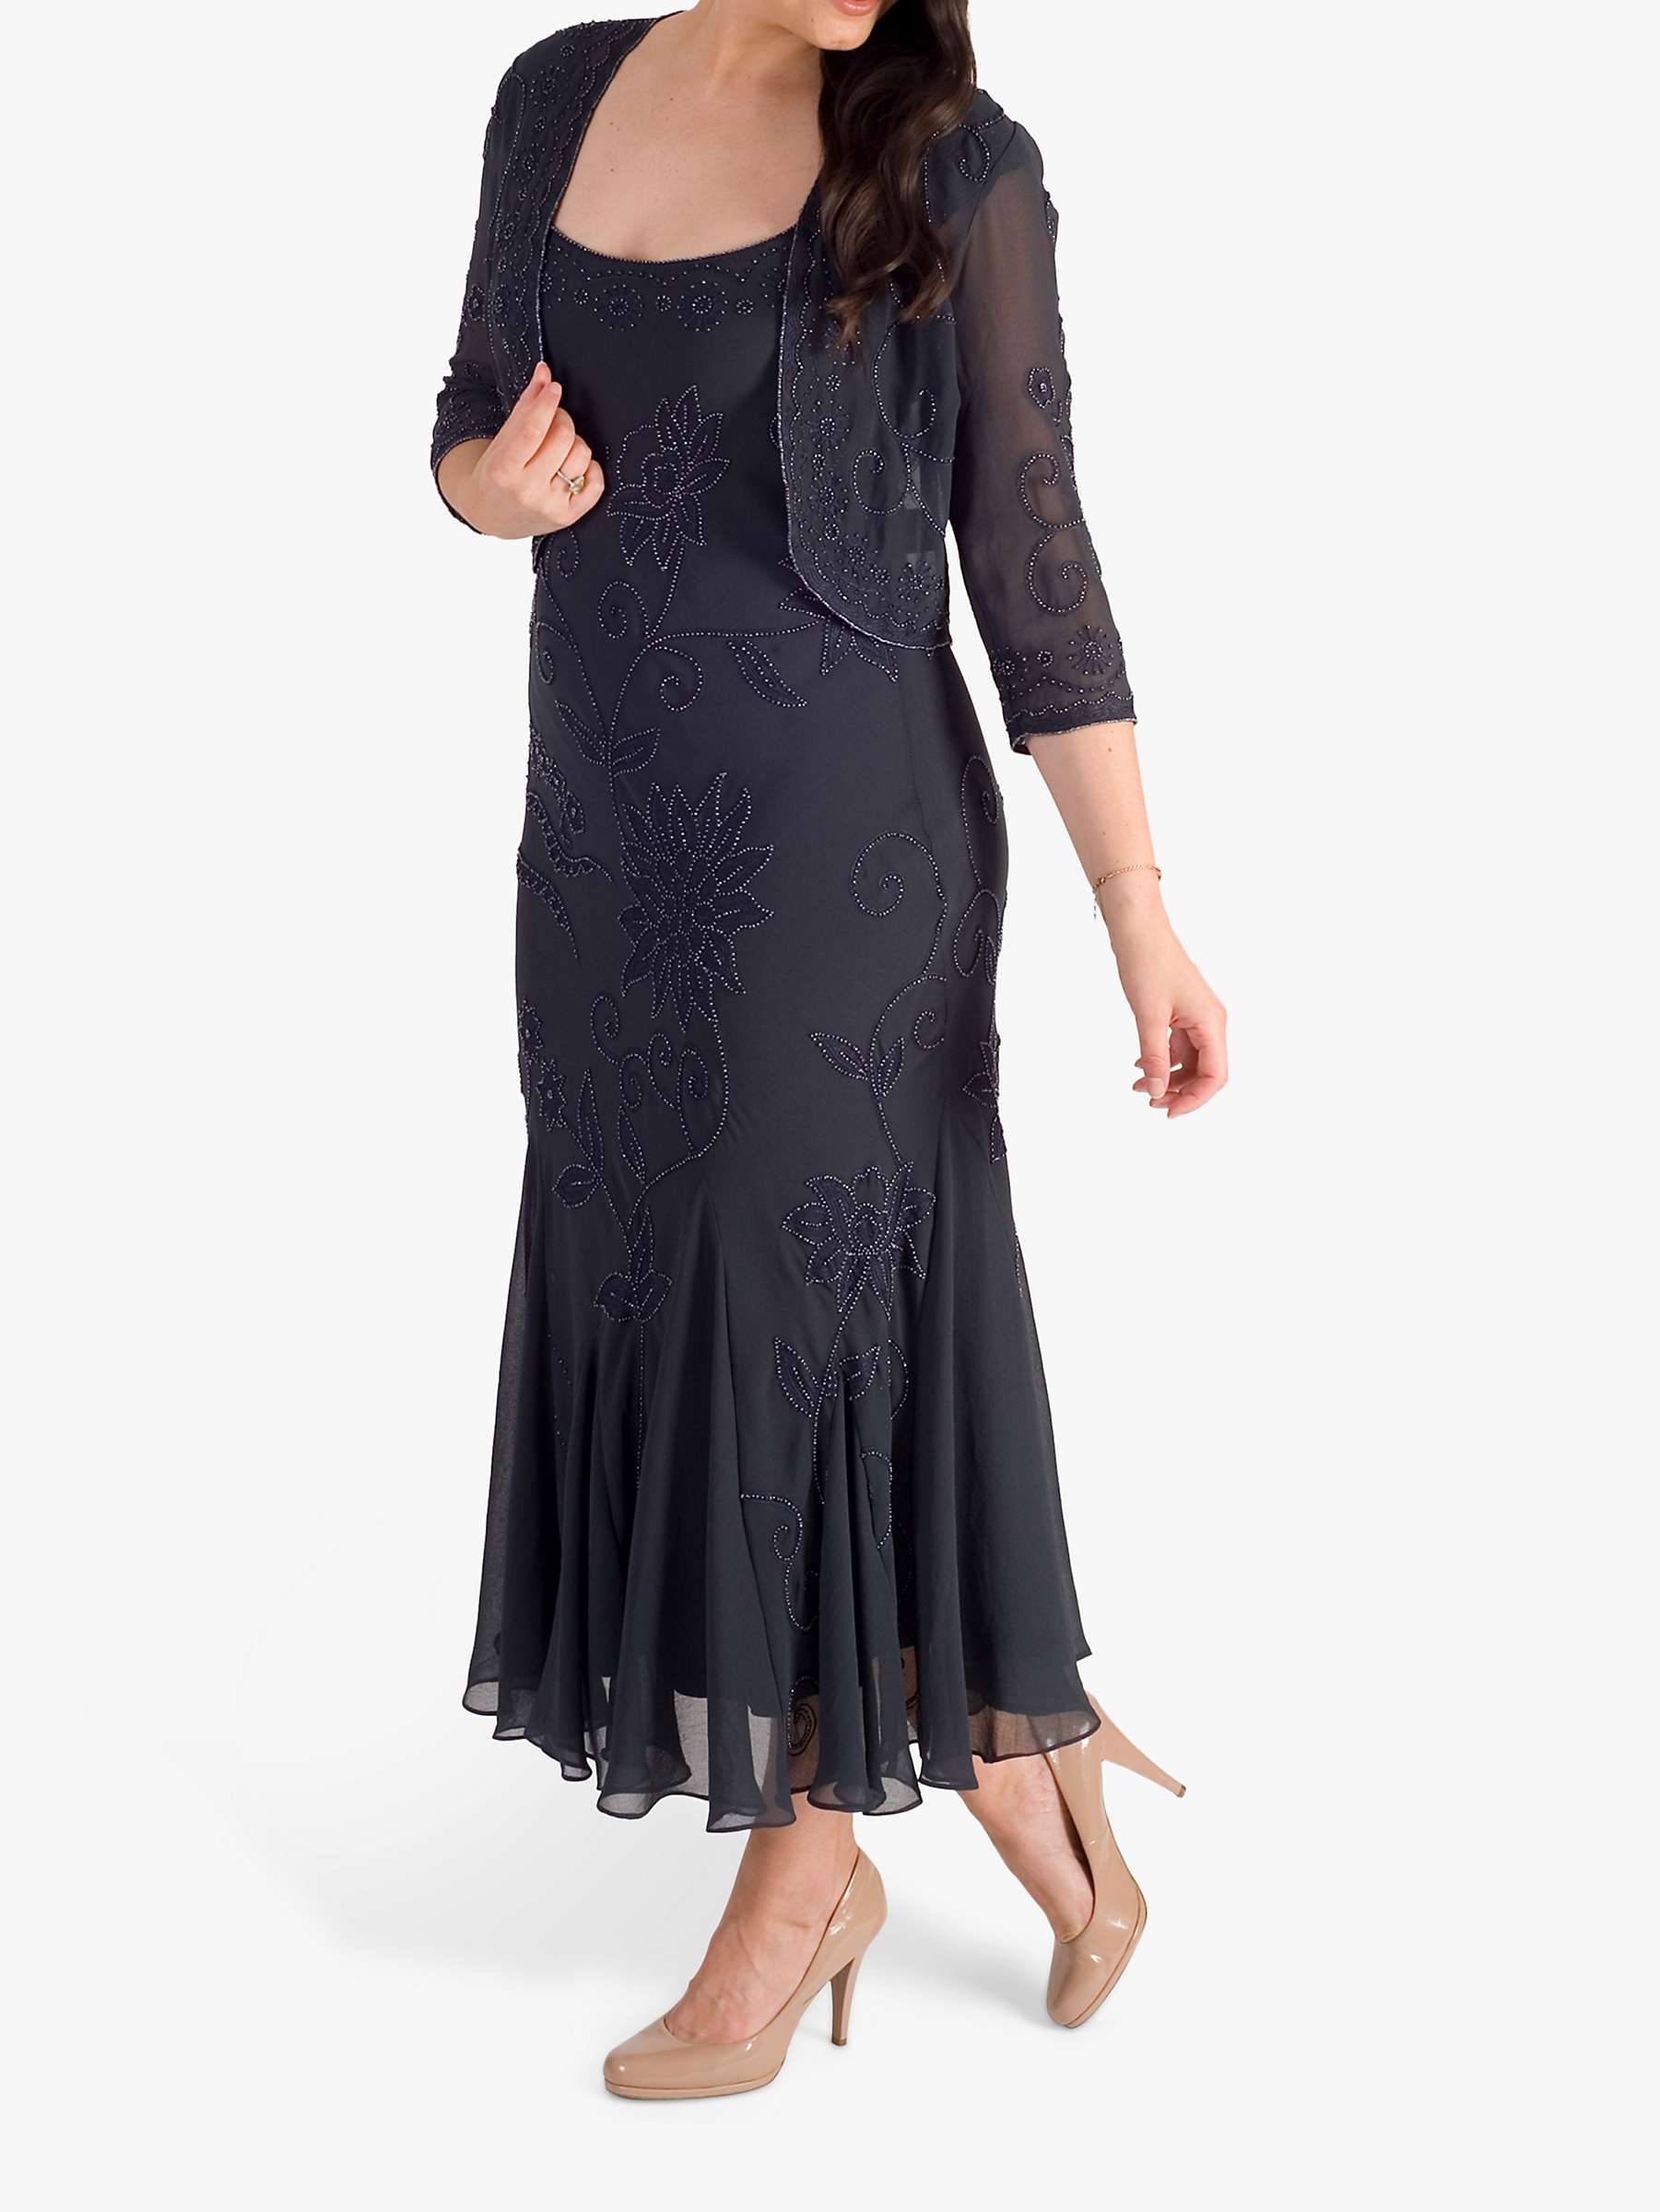 Buy chesca Beaded and Embroidered Dress, Pewter Online at johnlewis.com